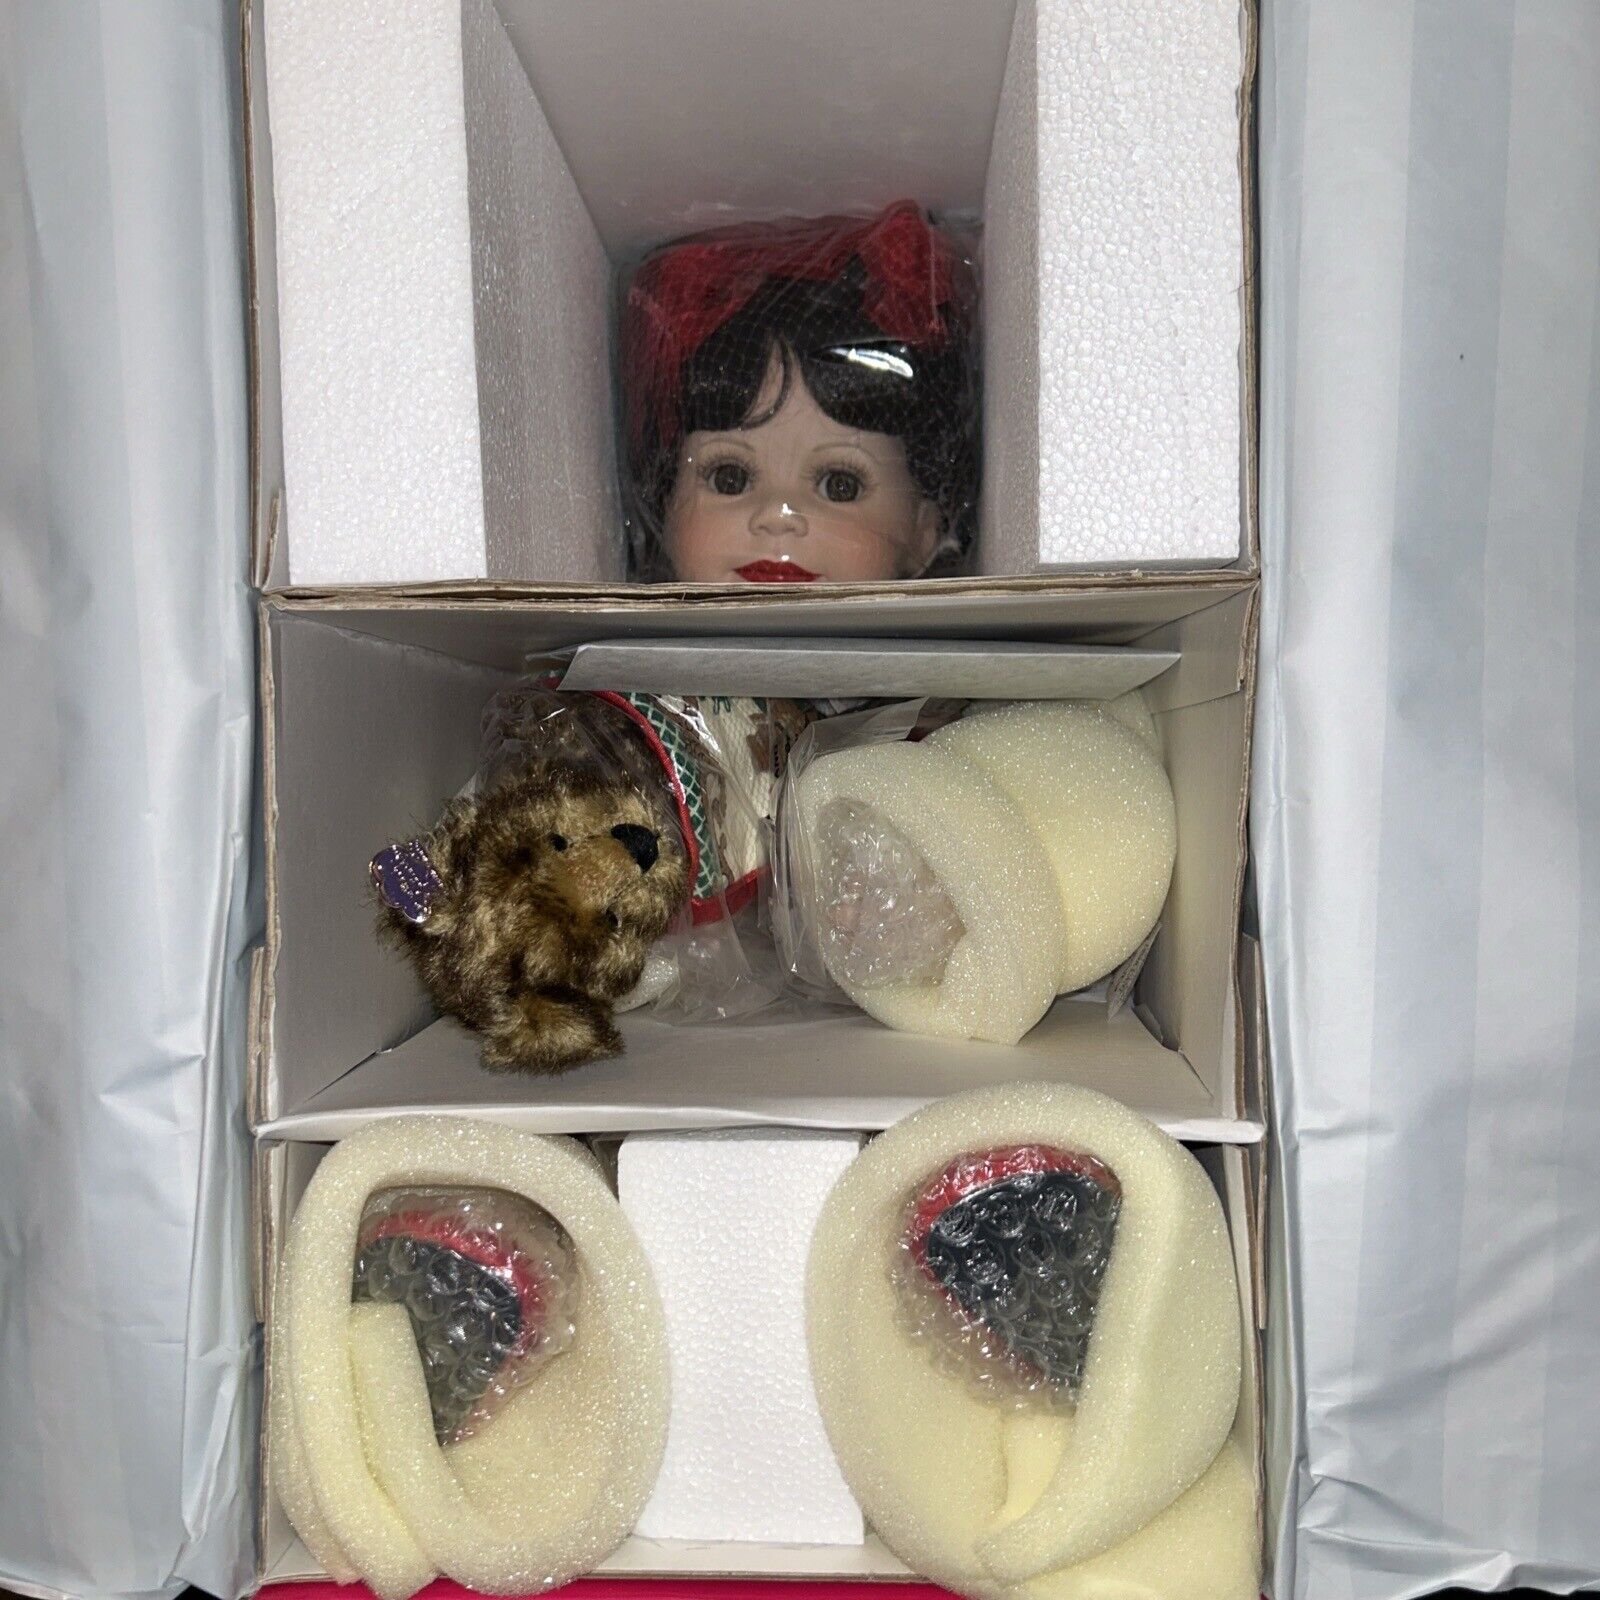 CLEARANCE Marie Osmond Baby Annette Holiday Limited Edi  #991 of 3,000 (AL1127a)